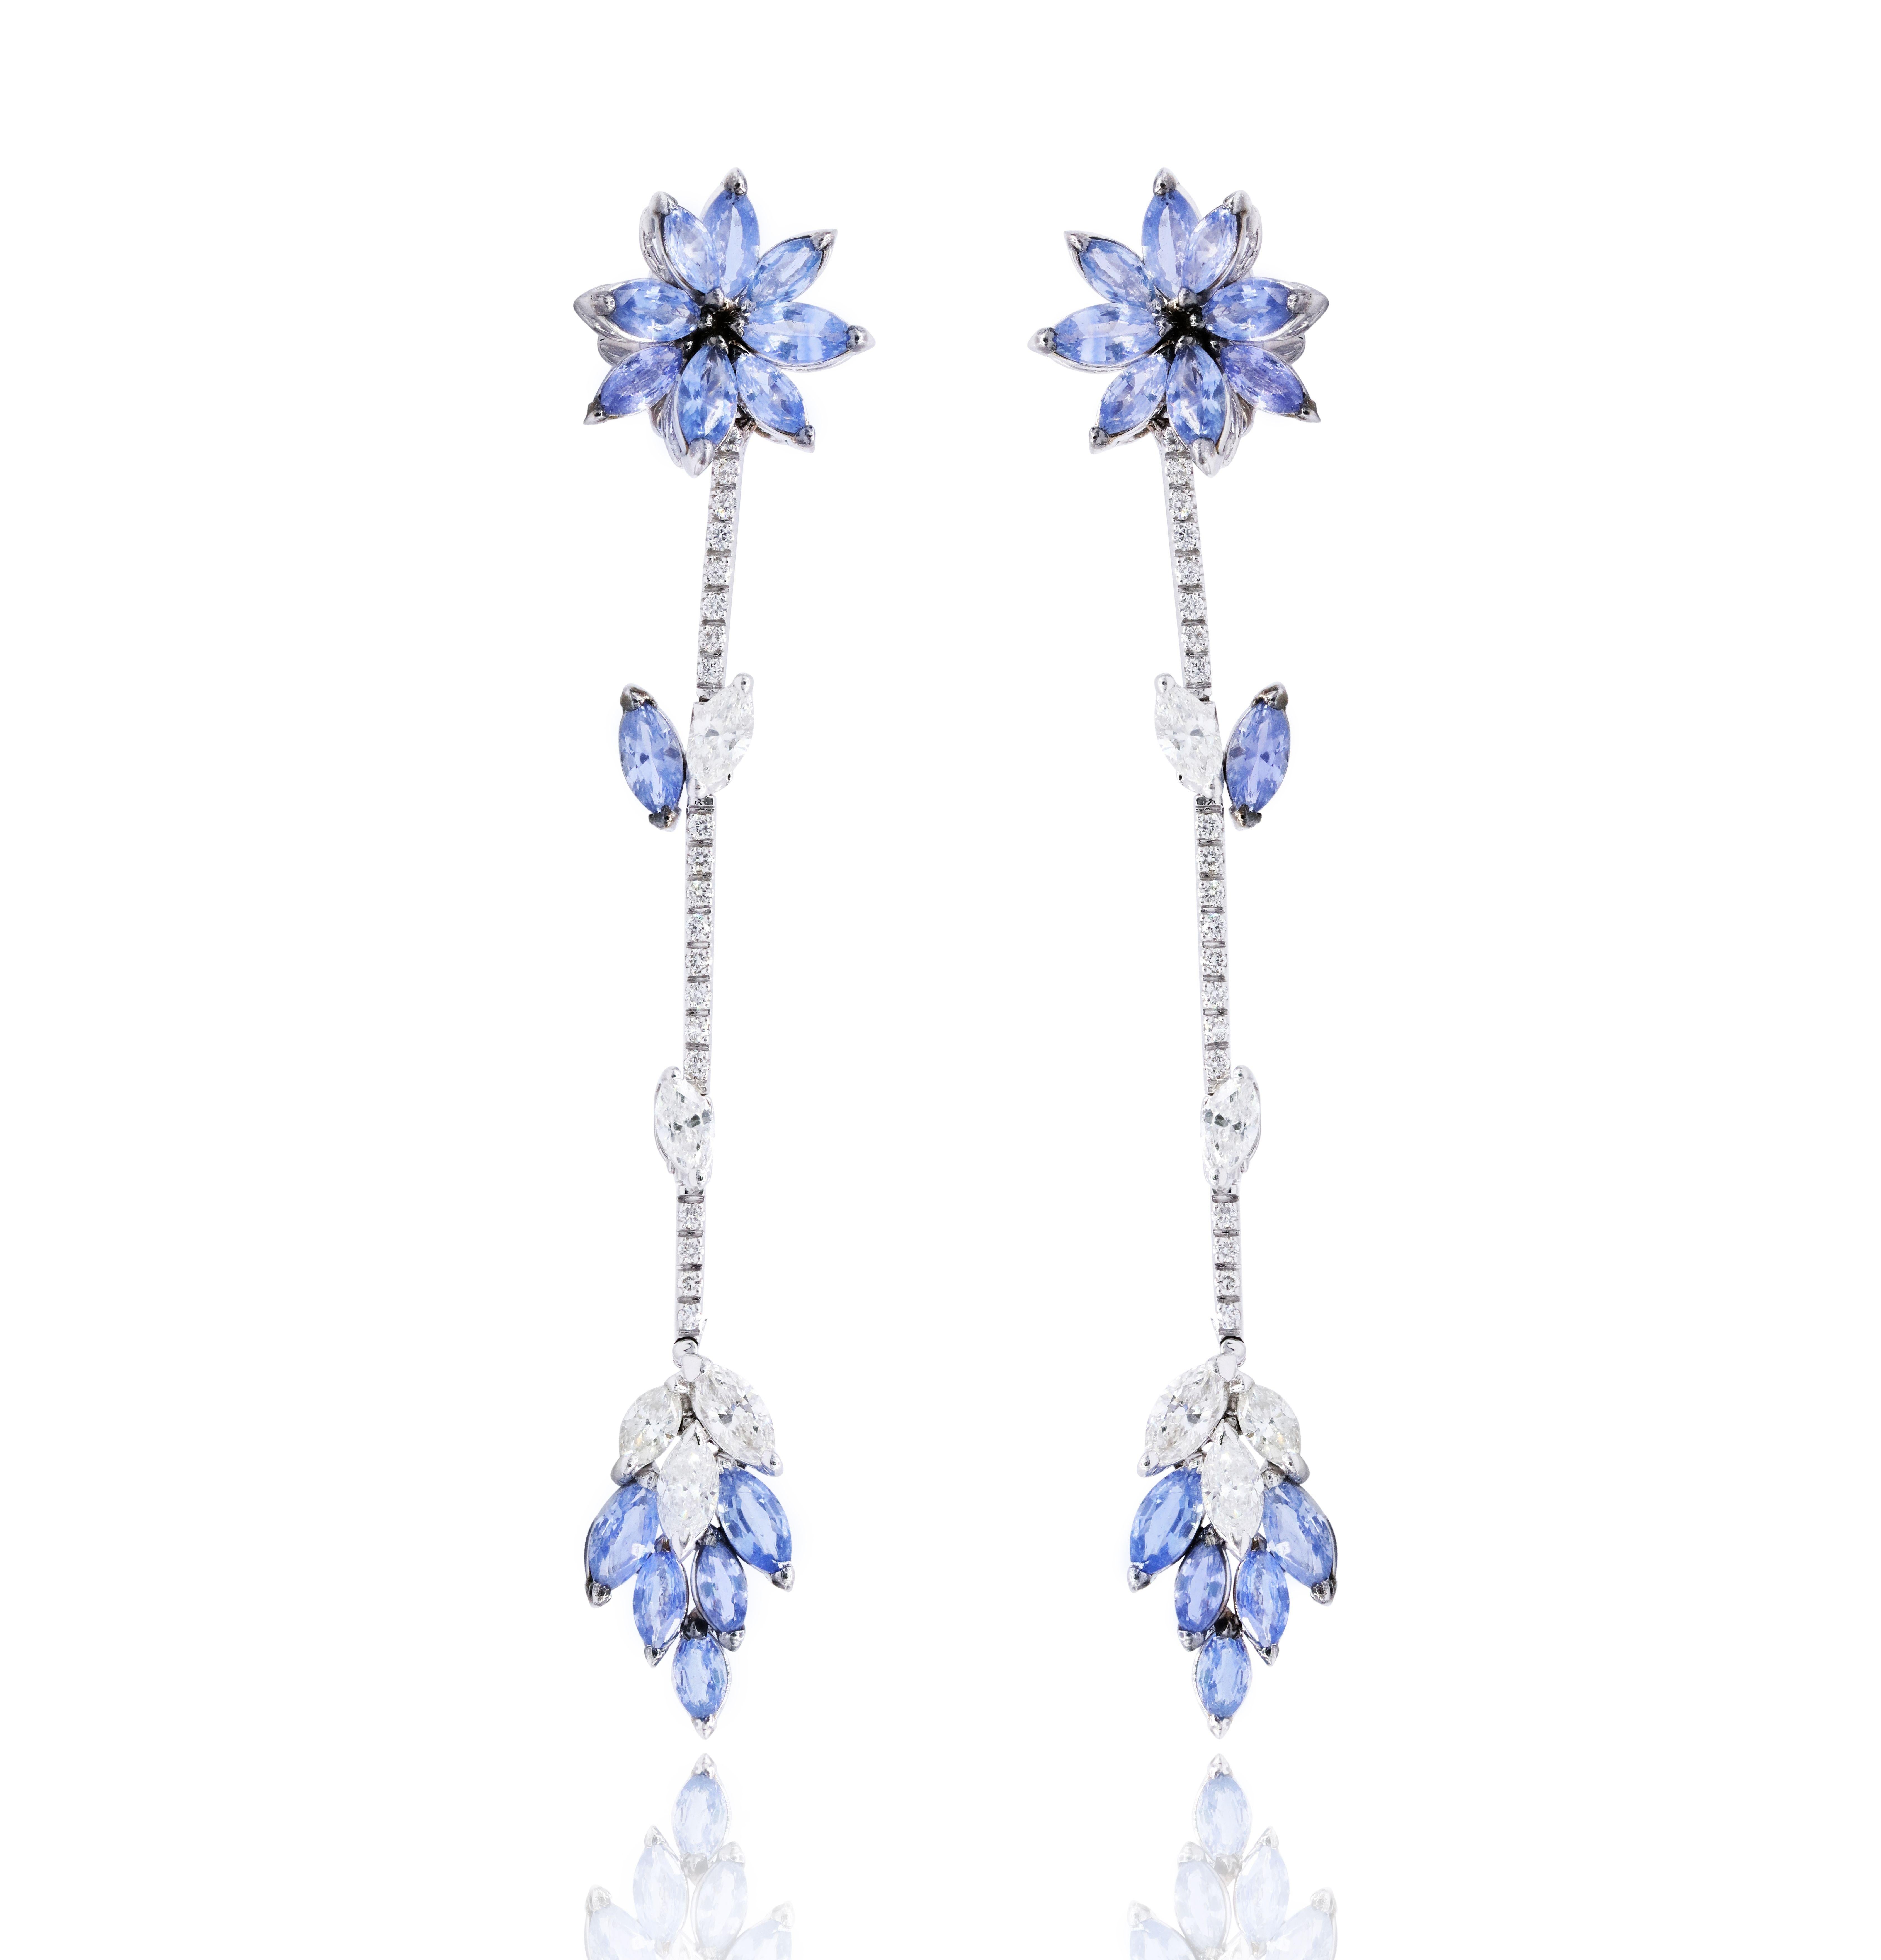 Marquise Cut Diana M. 6.23 Carat Sapphire and Diamond Hanging Flower Earrings For Sale